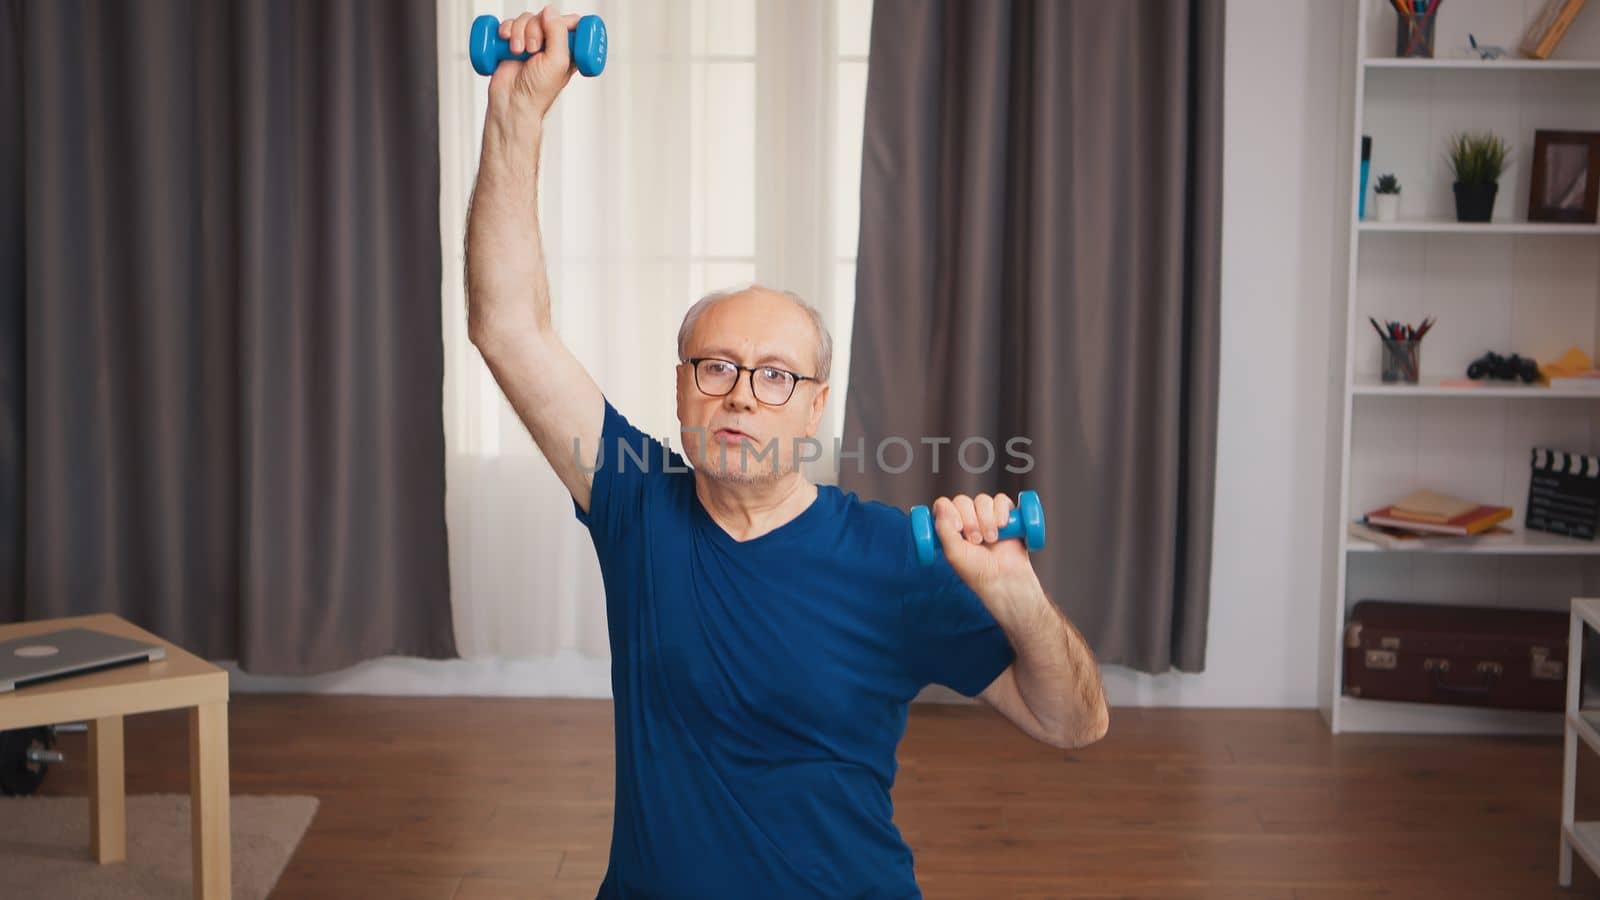 Senior man doing sports in living room using dumbbells. Old person pensioner healthy training healthcare sport at home, exercising fitness activity at elderly age